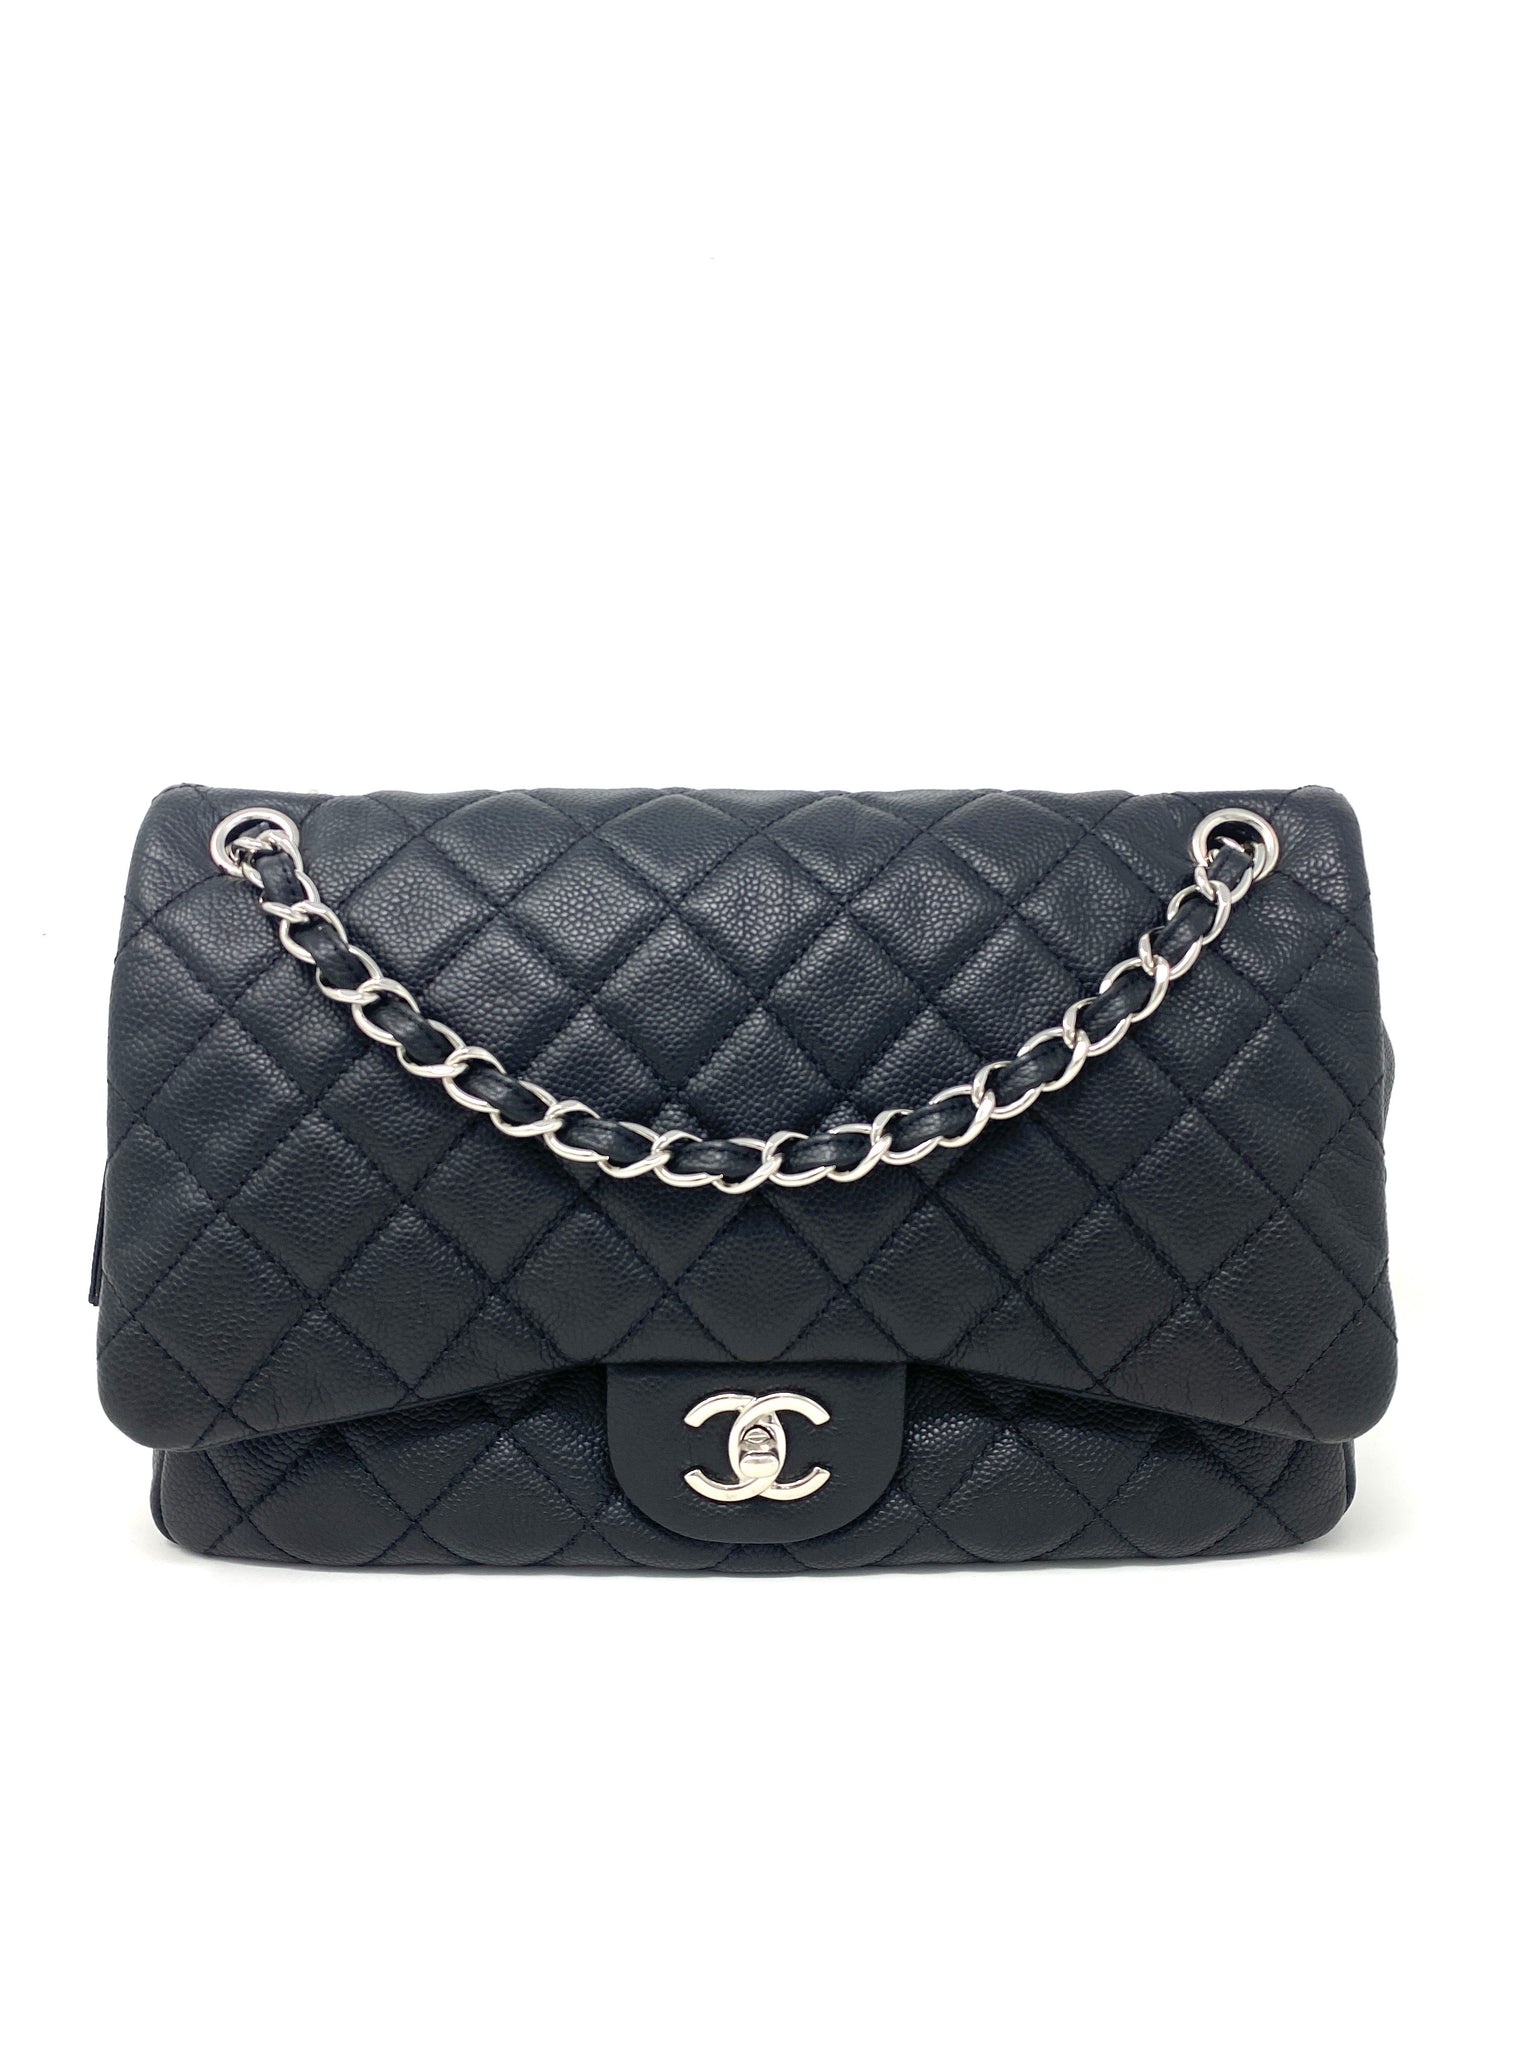 Chanel Black Quilted Grained Calfskin Small Vanity Case Gold Hardware, 2021, Womens Handbag